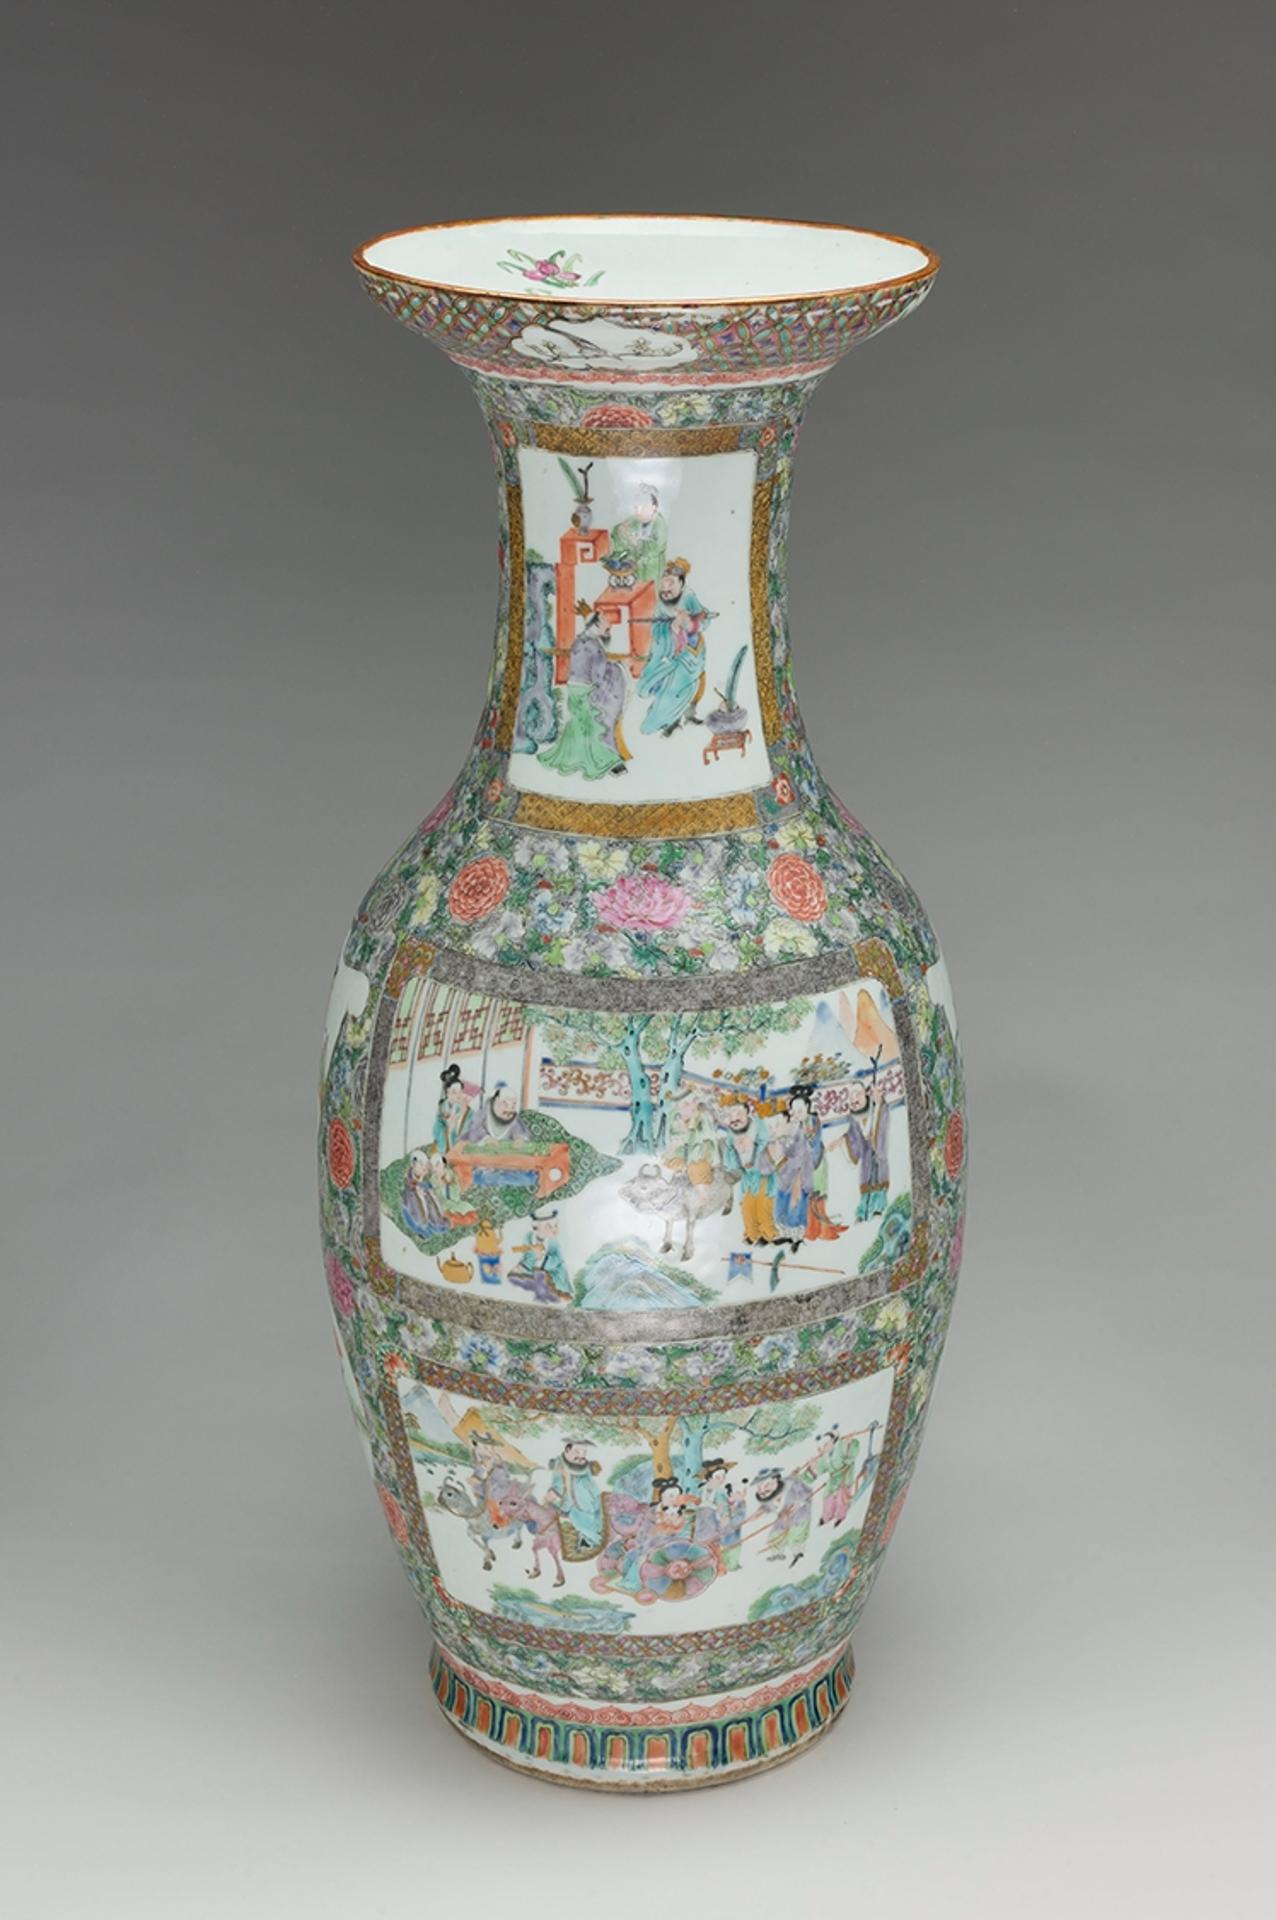 Chinese Art - A Large Export Canton Rose 'Figural' Vase, circa 1850